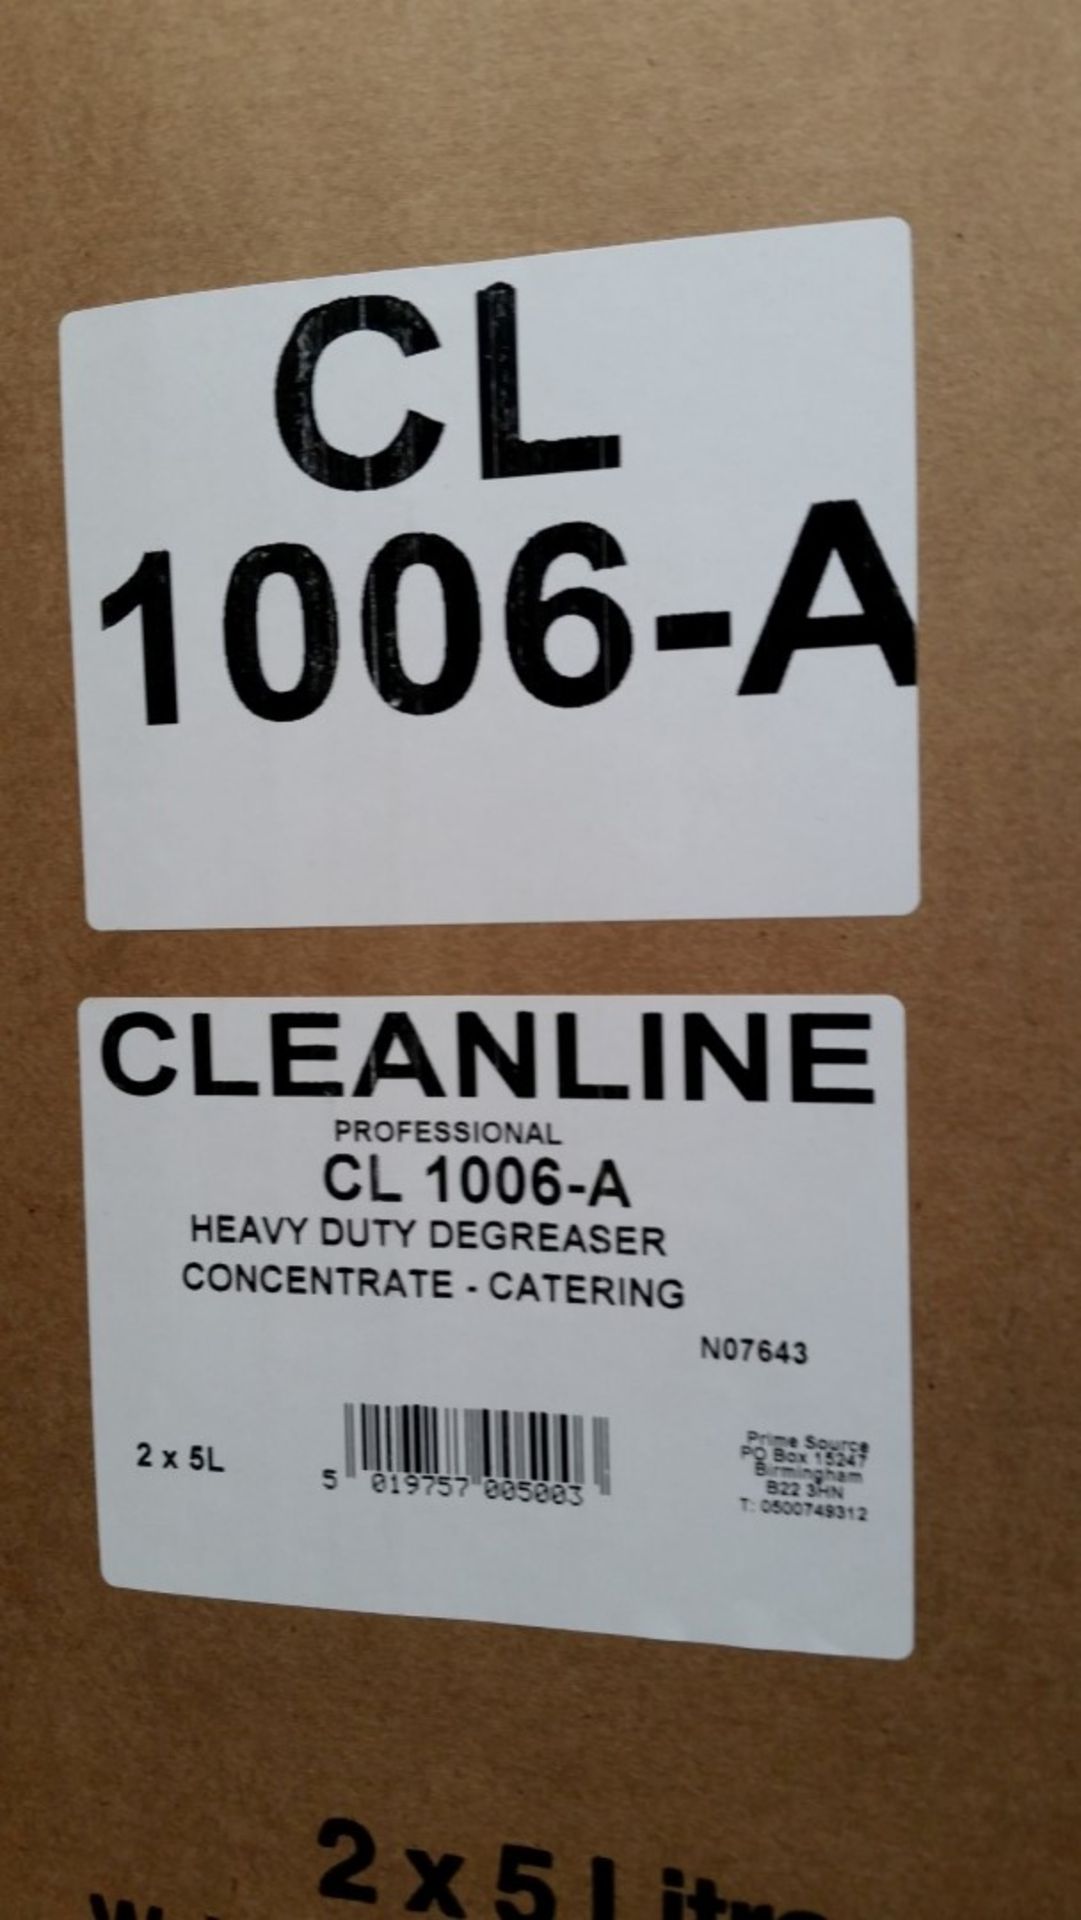 2 x Clean Line Professional 5 Litre Heavy Duty Degreaser Concentrate - Alkaline Cleaner & - Image 5 of 5